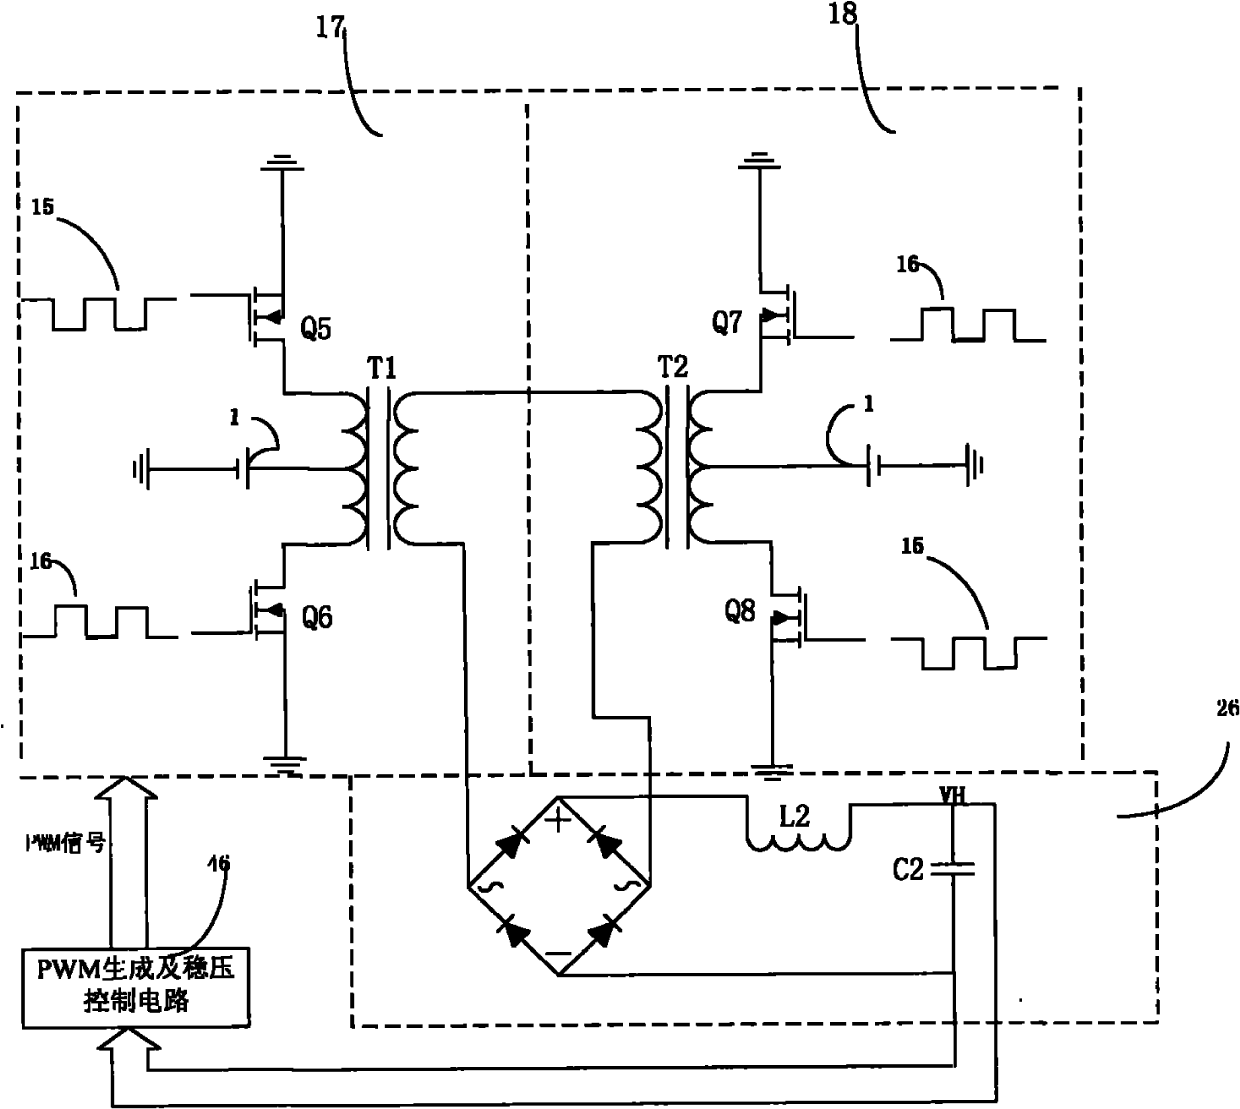 Direct-current booster circuit suitable for micro power inversion